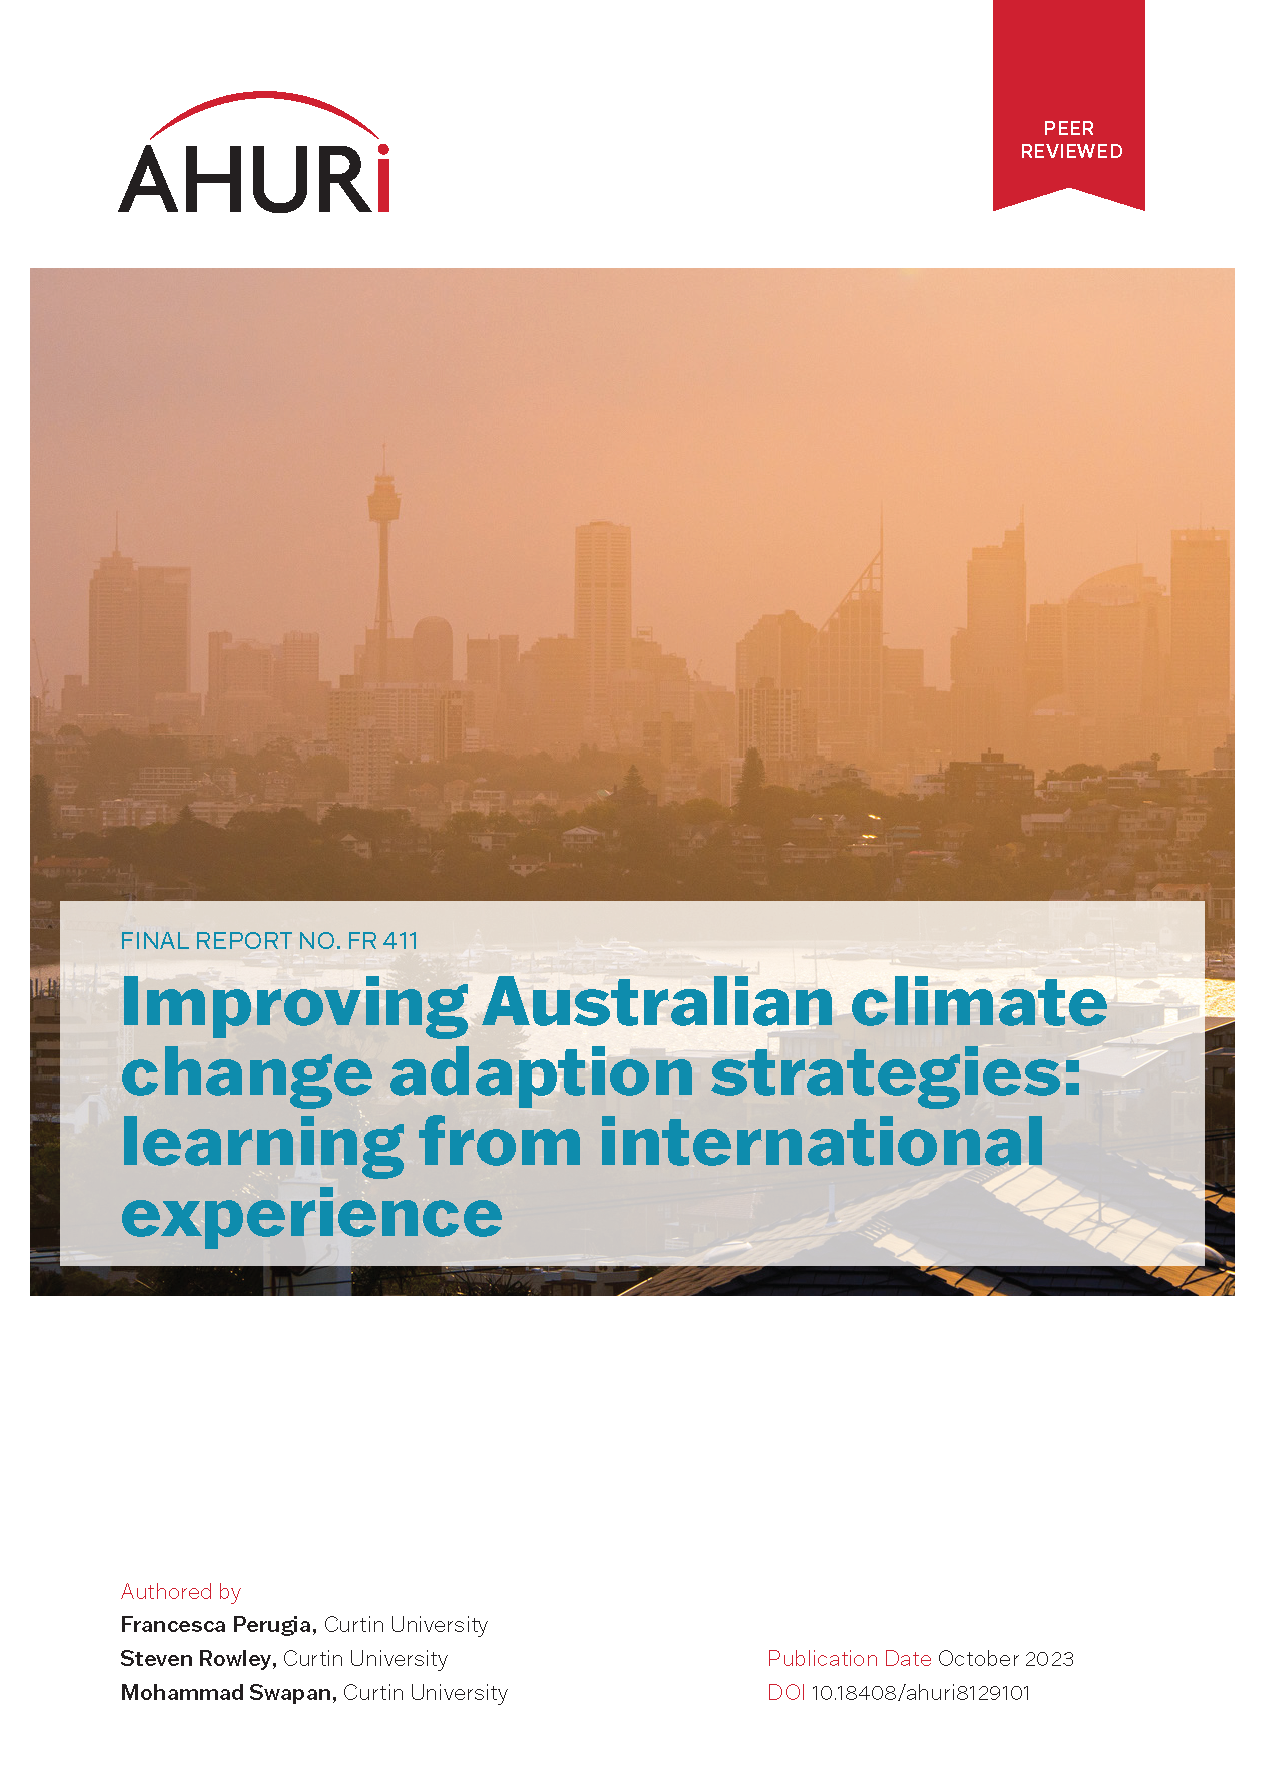 Improving Australian climate change adaption strategies: learning from international experience